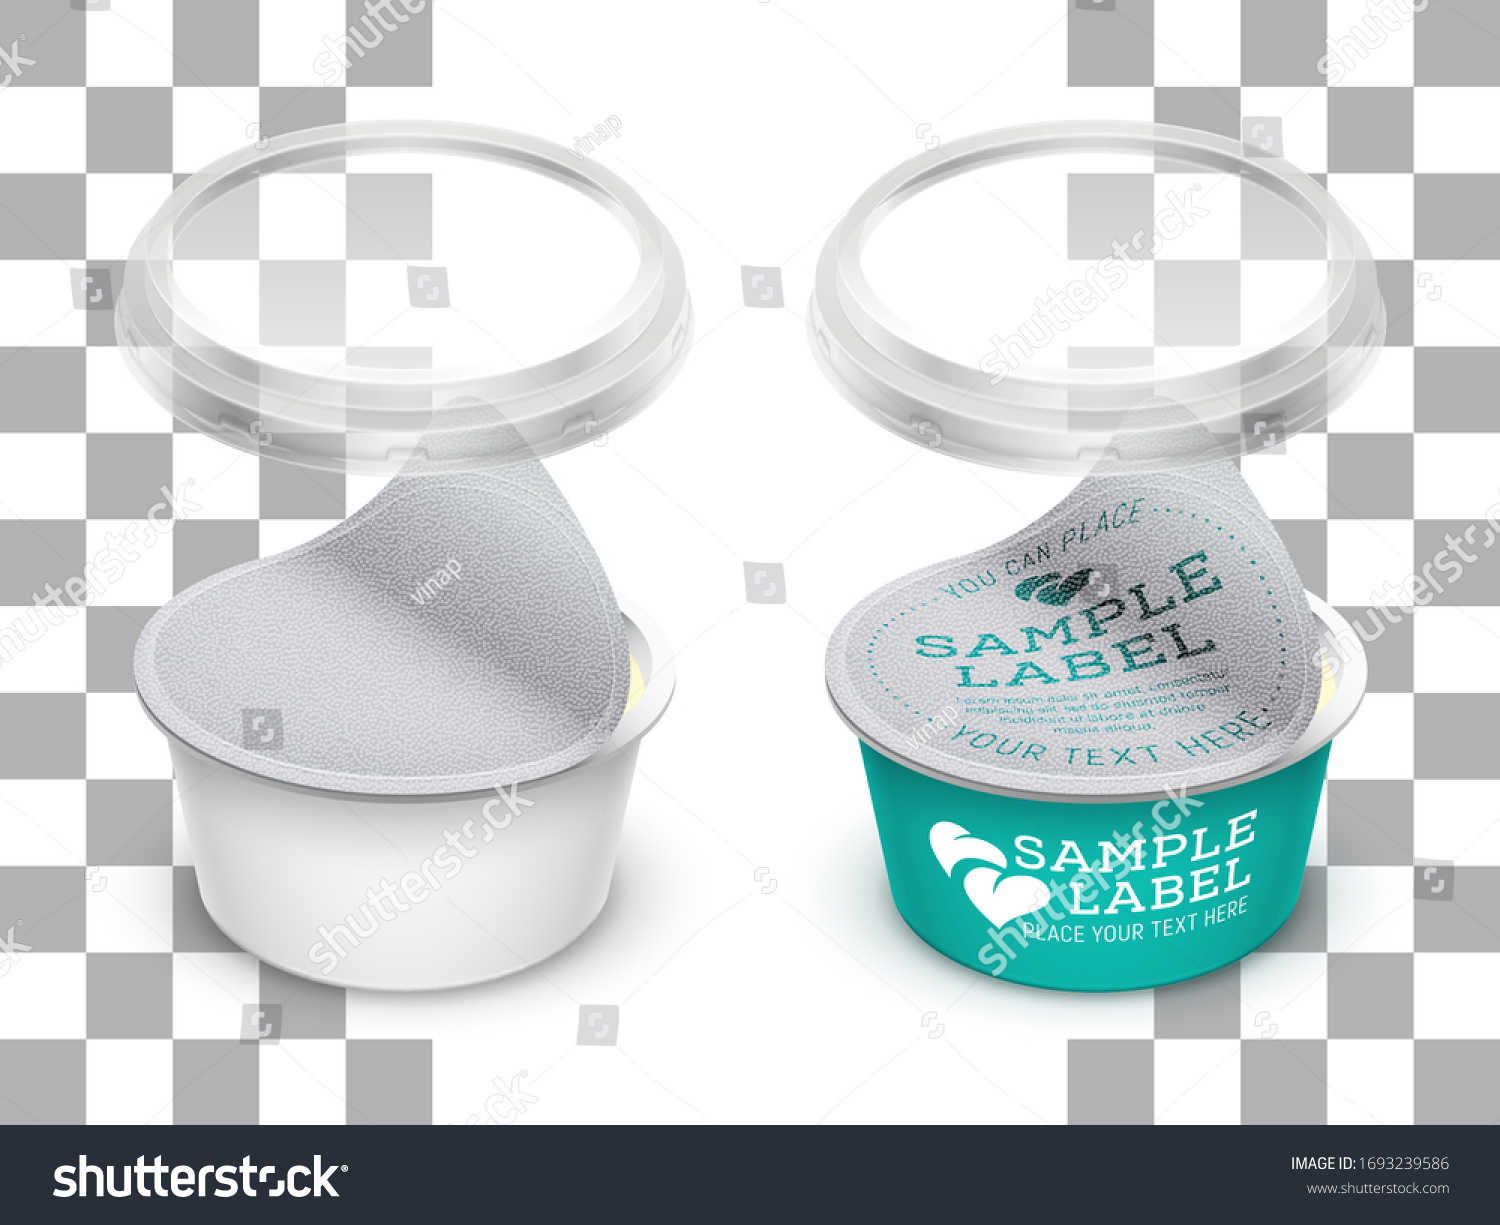 SVG of Vector labeled round plastic container with opened foil, transparent lid and butter, melted cheese or cosmetics within. Packaging mockup illustration. svg